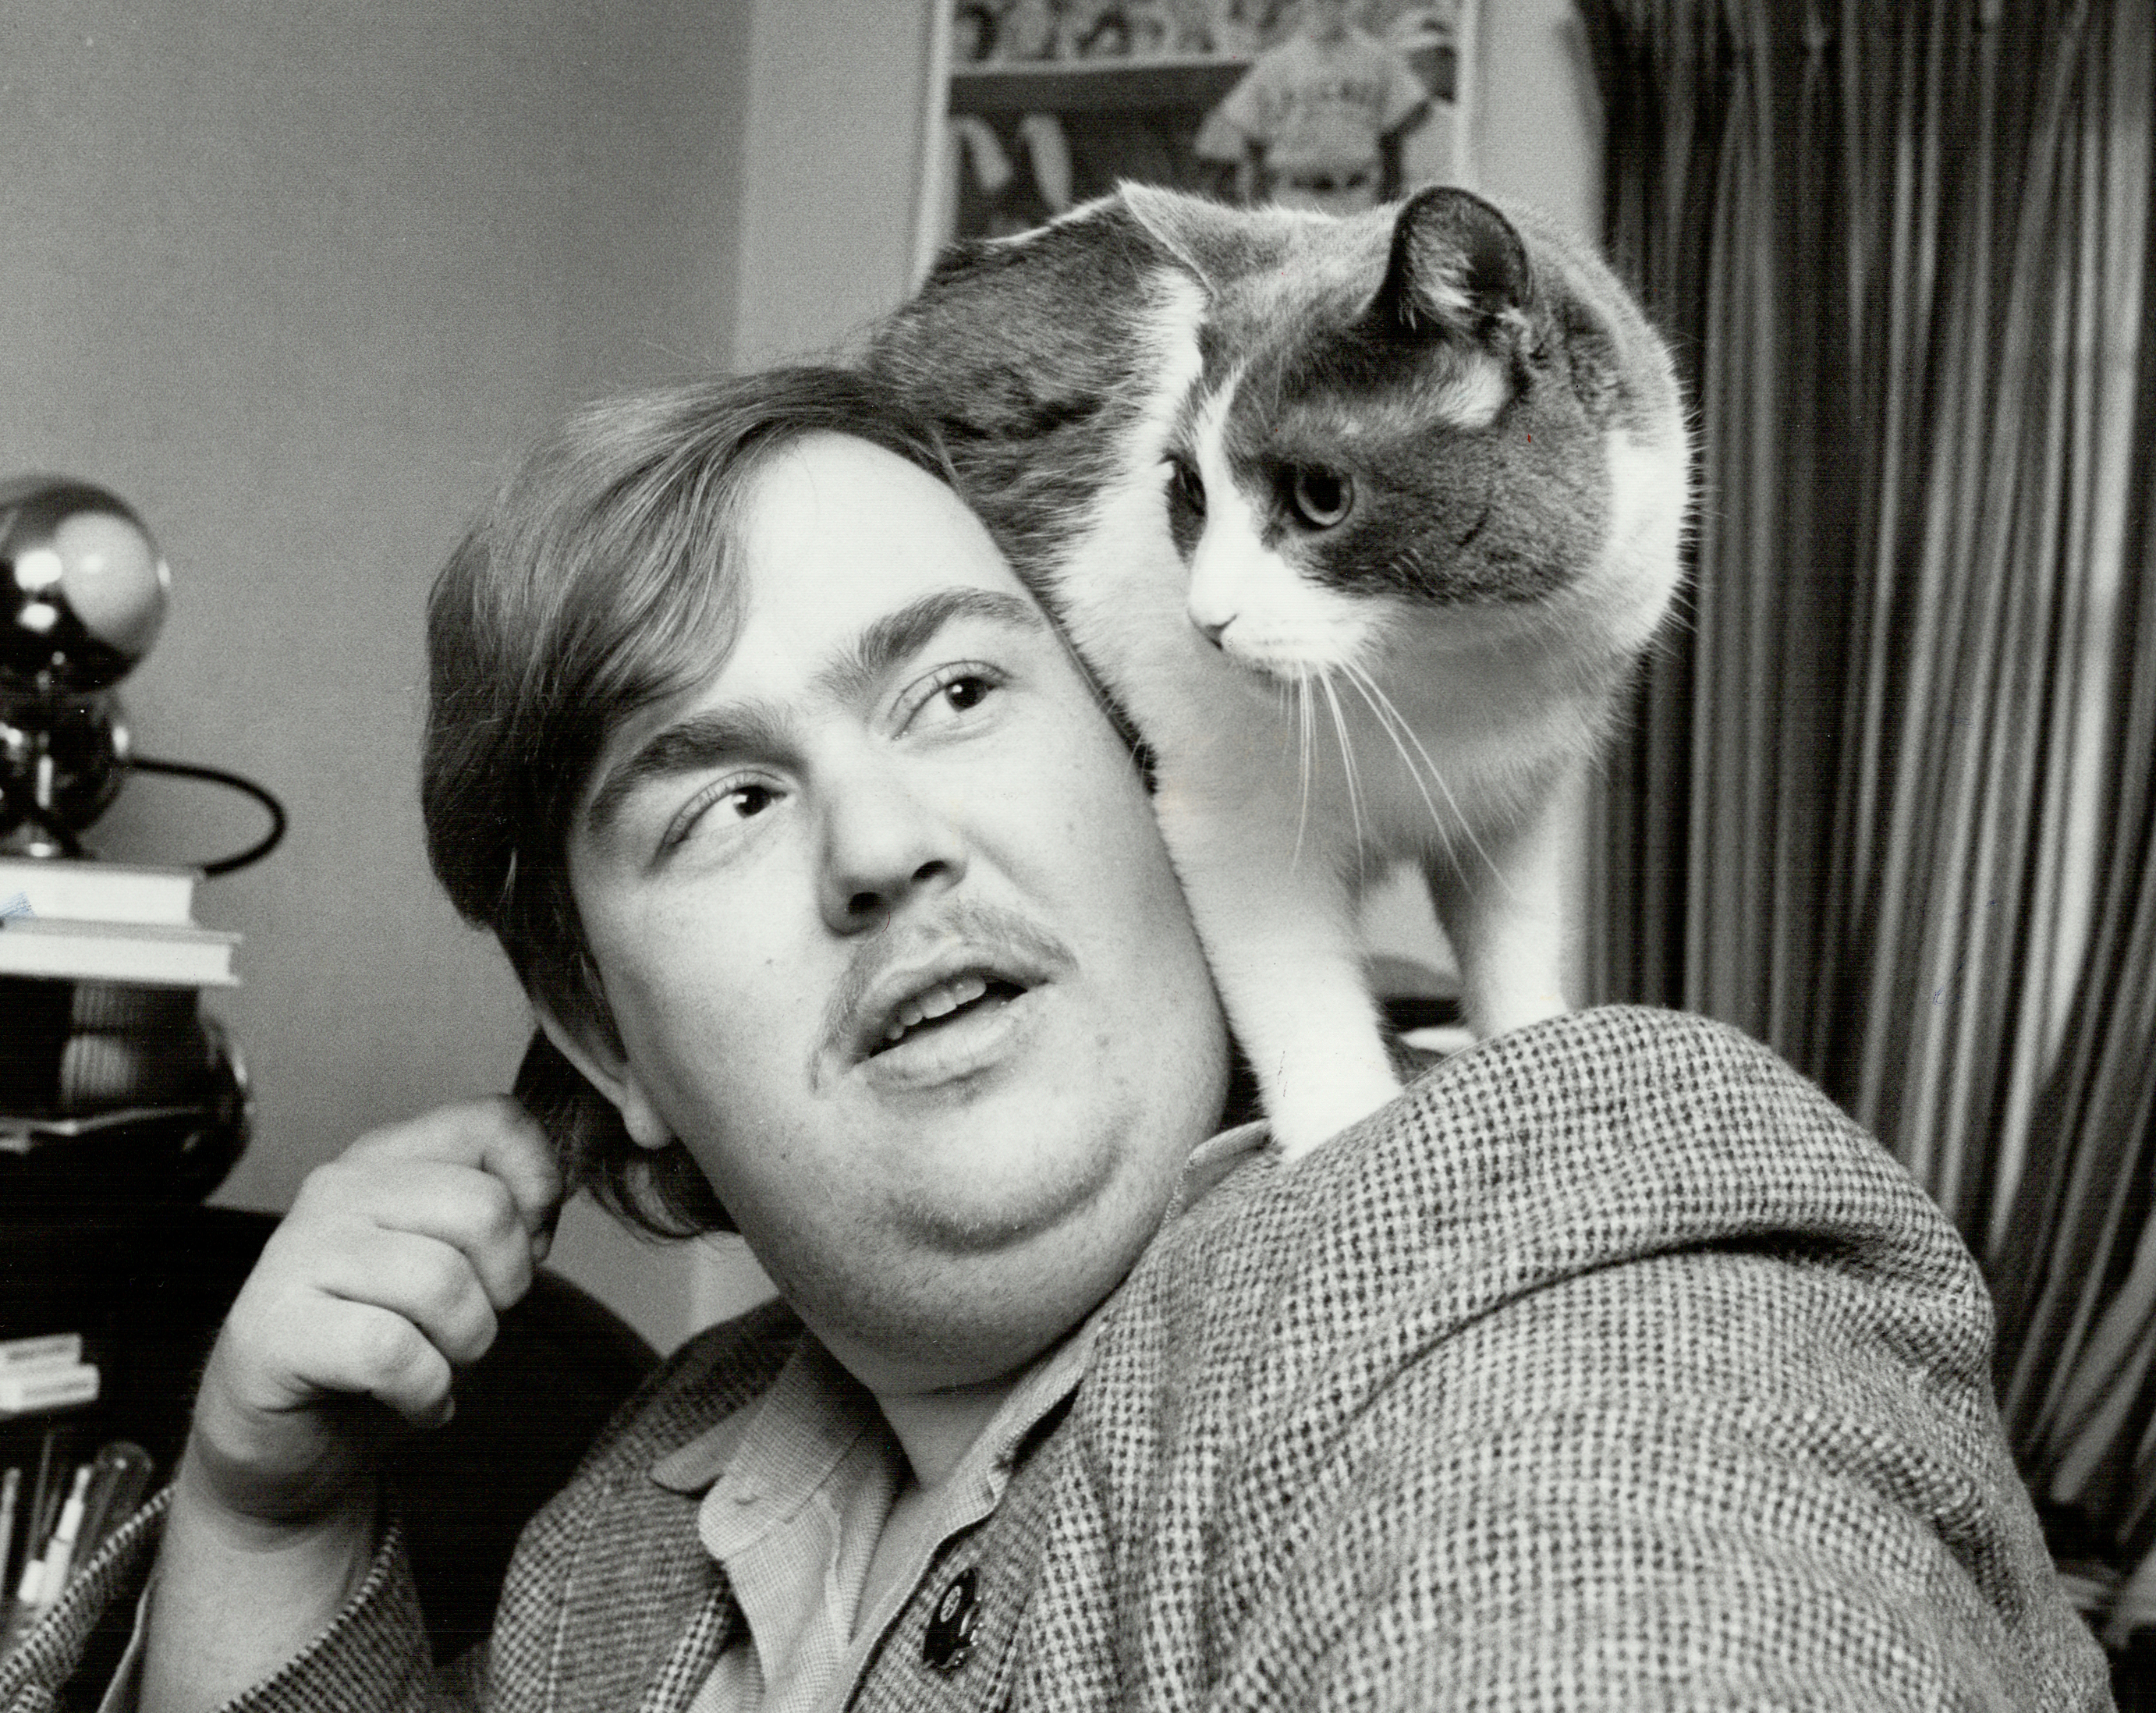 John Candy, circa 1980 | Source: Getty Images